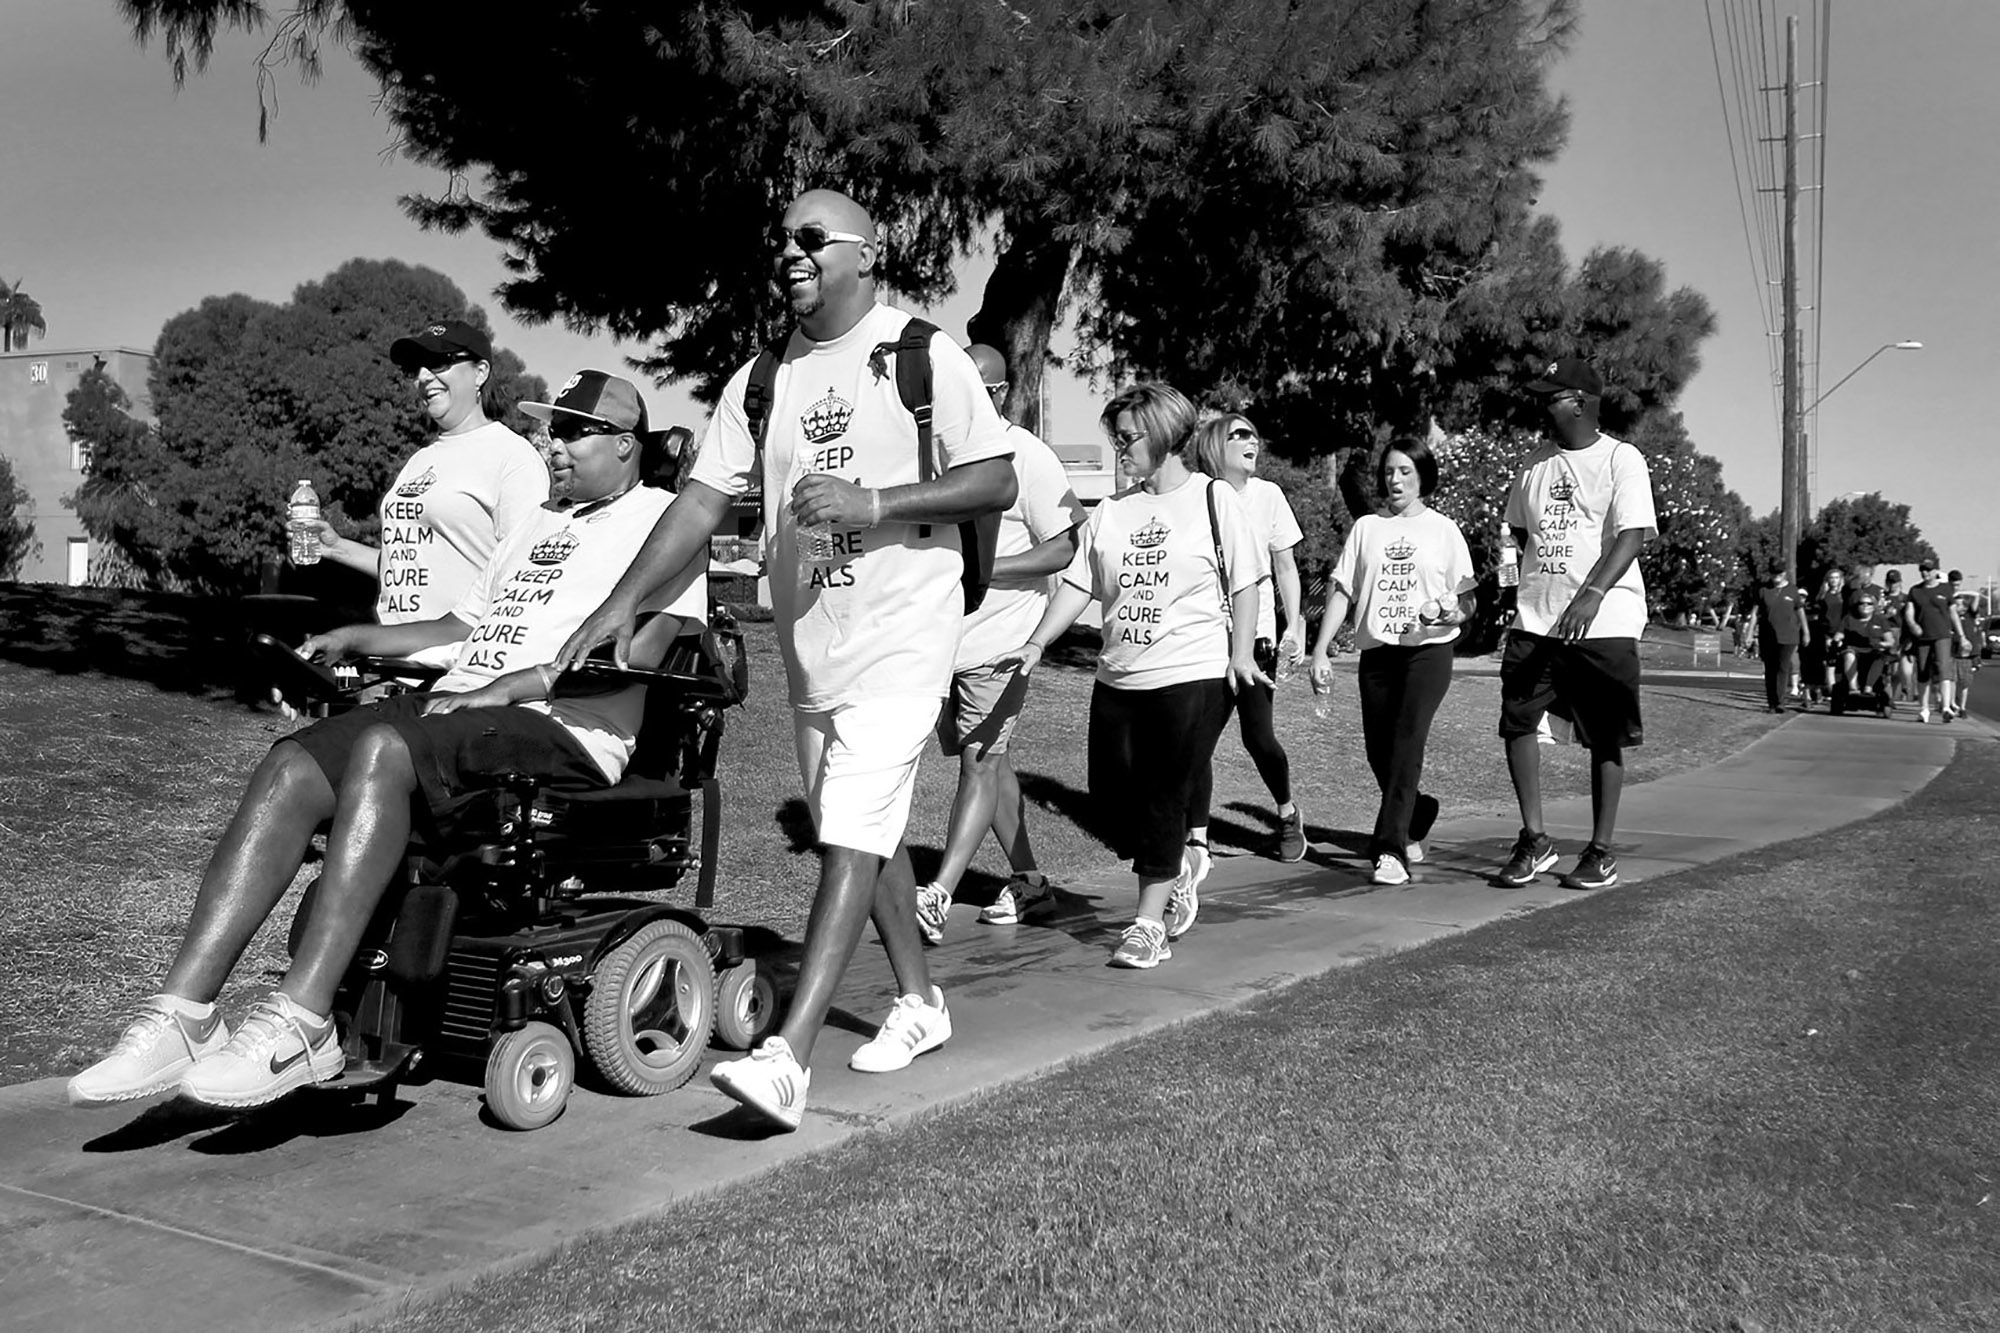  Mike drives alongside his former housemate Decarus Bennett, Rene and other supporters during the annual Walk to Defeat ALS in Scottsdale, Arizona. 